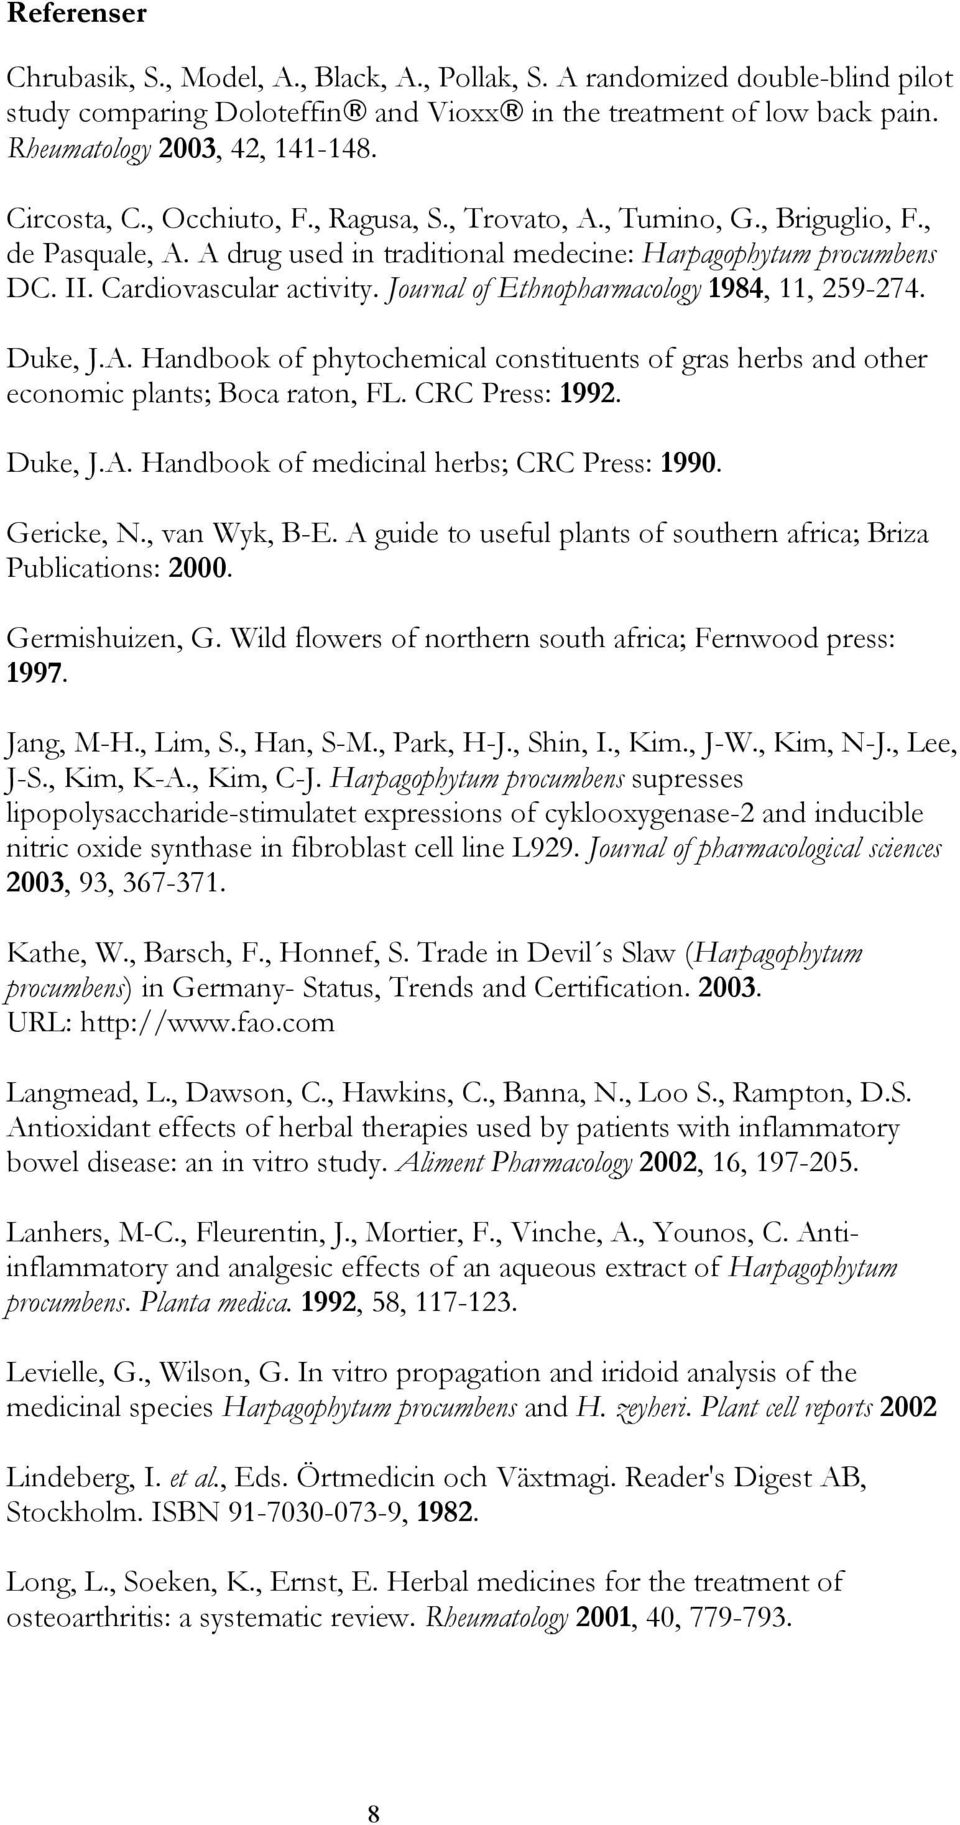 Journal of Ethnopharmacology 1984, 11, 259-274. Duke, J.A. Handbook of phytochemical constituents of gras herbs and other economic plants; Boca raton, FL. CRC Press: 1992. Duke, J.A. Handbook of medicinal herbs; CRC Press: 1990.